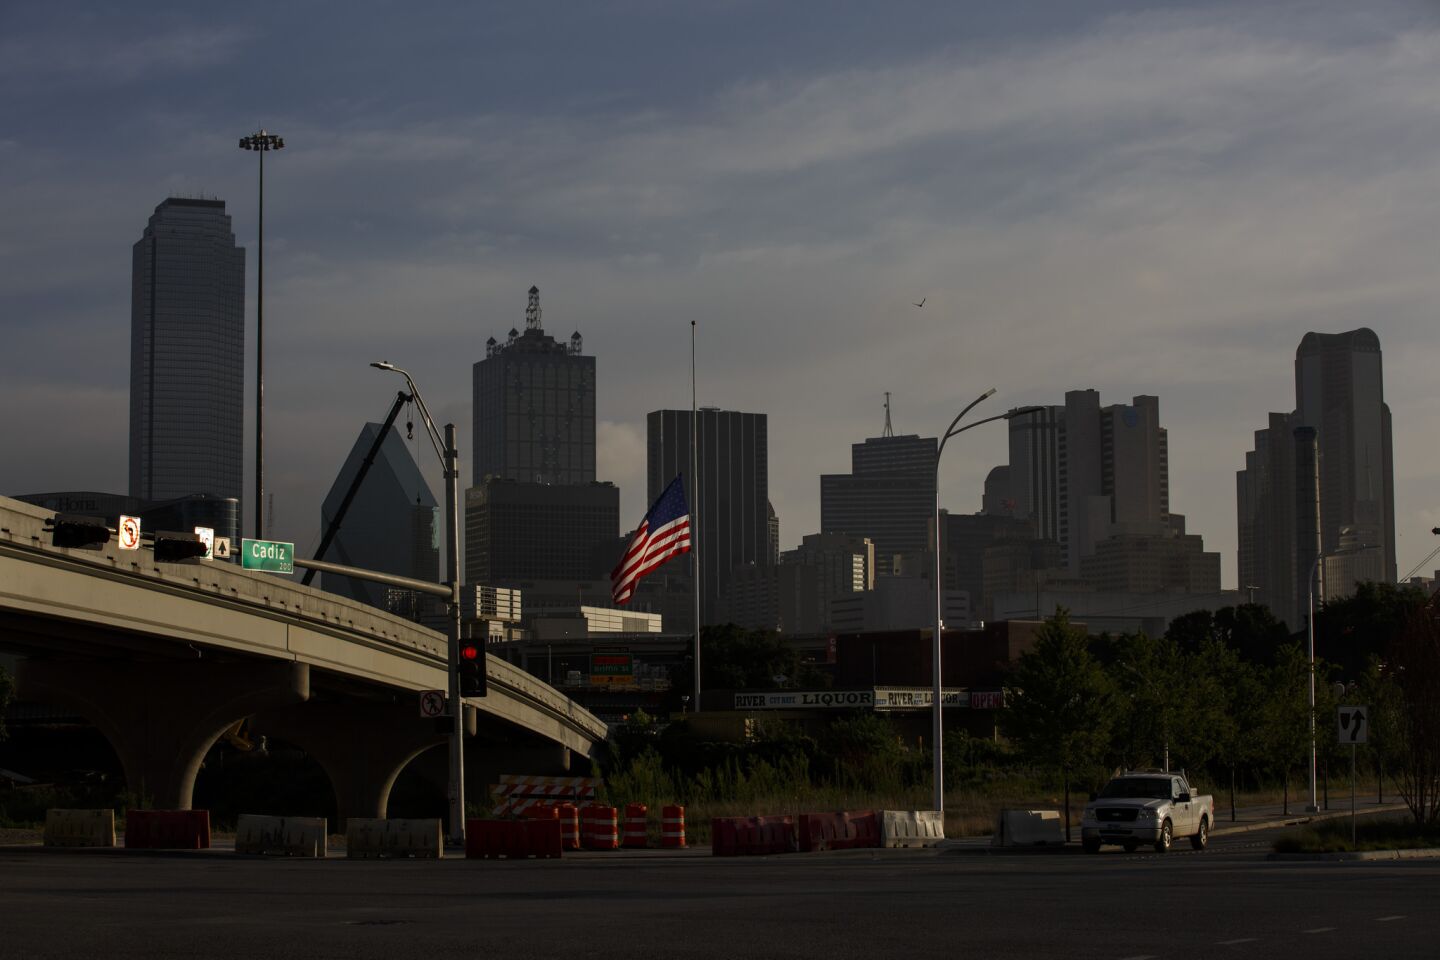 A large American flag flies at half mast framed by the Dallas skyline in the aftermath of the deadly police shooting.